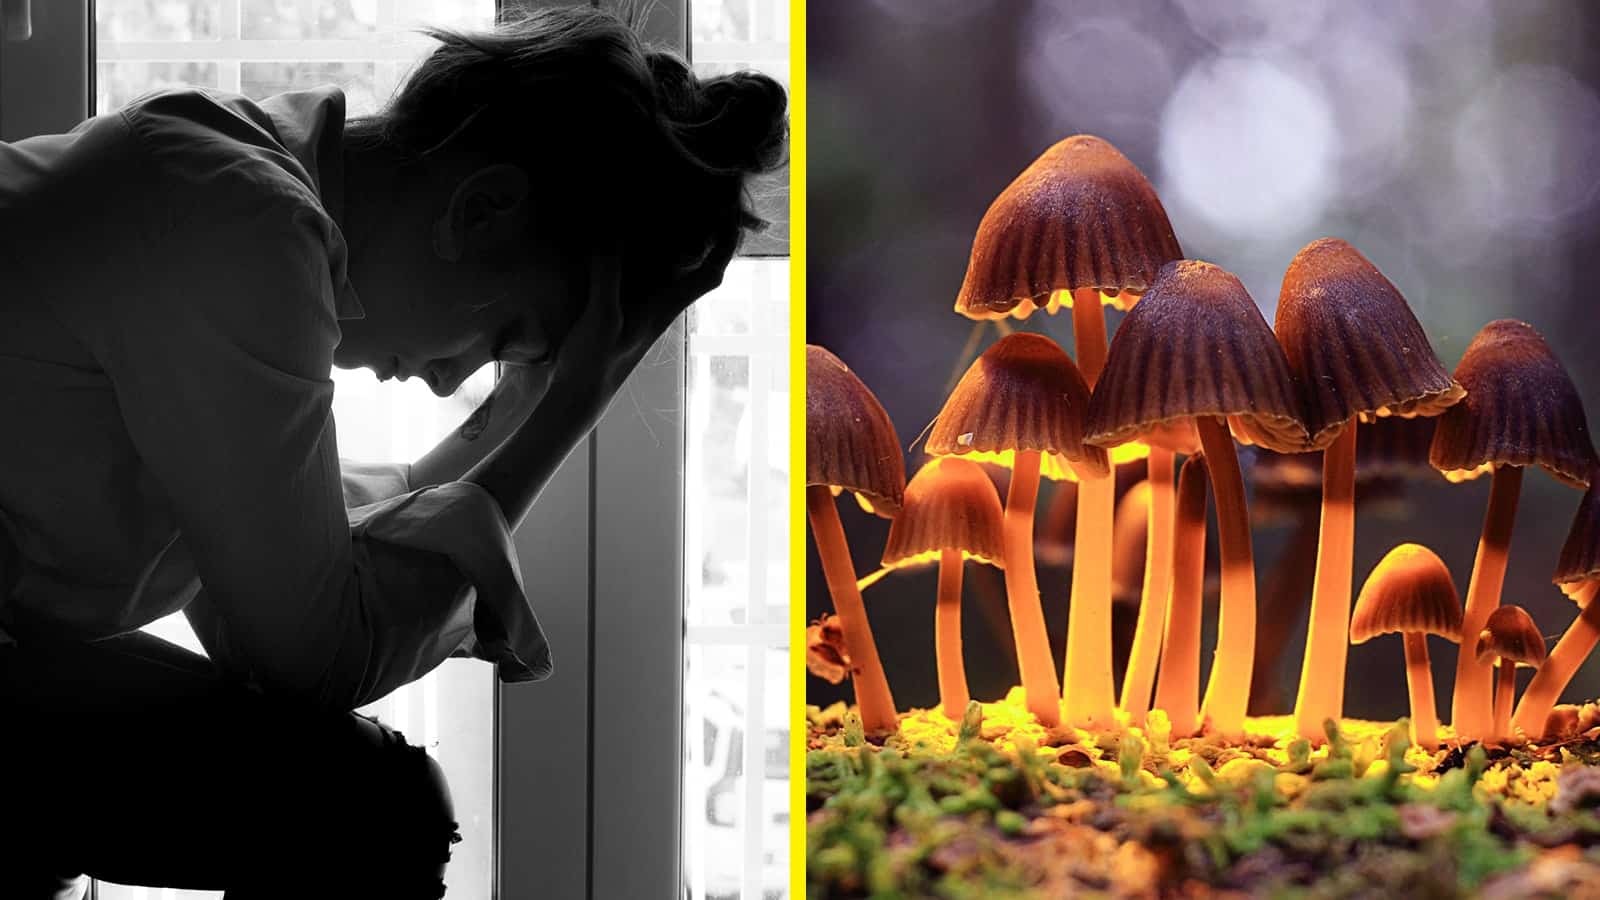 Researchers Explain How to Treat Depression With Mushrooms